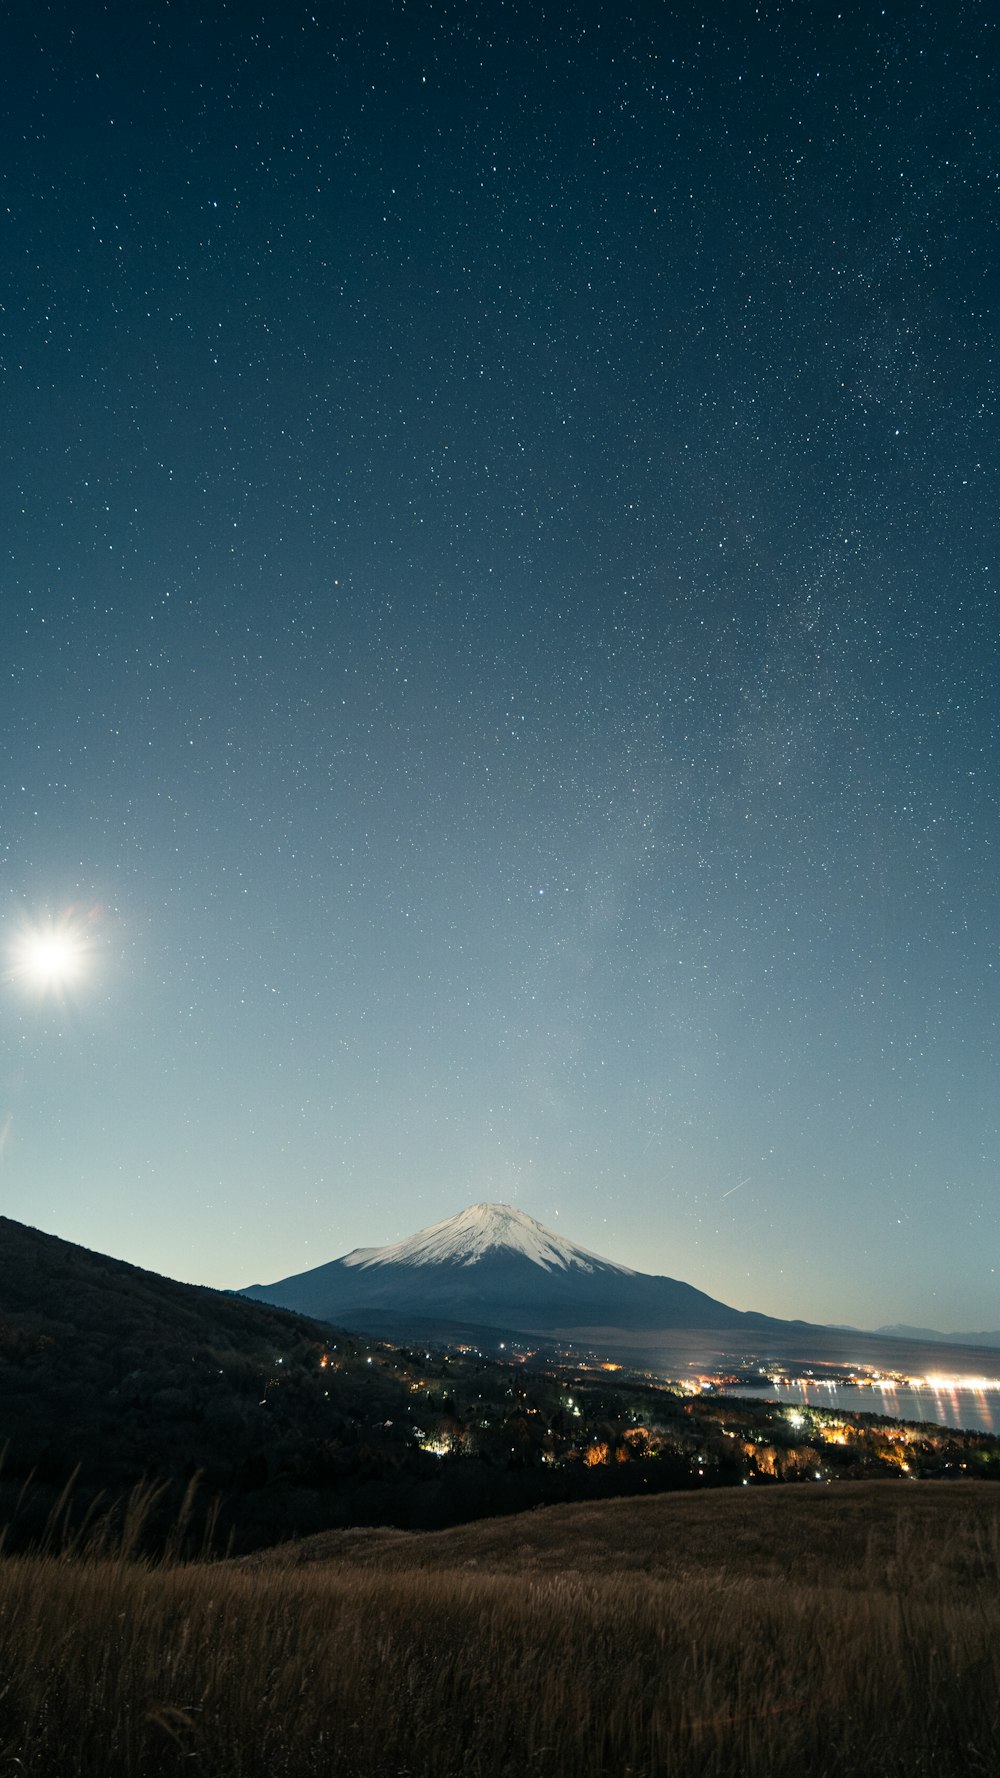 a view of the night sky with a mountain in the background